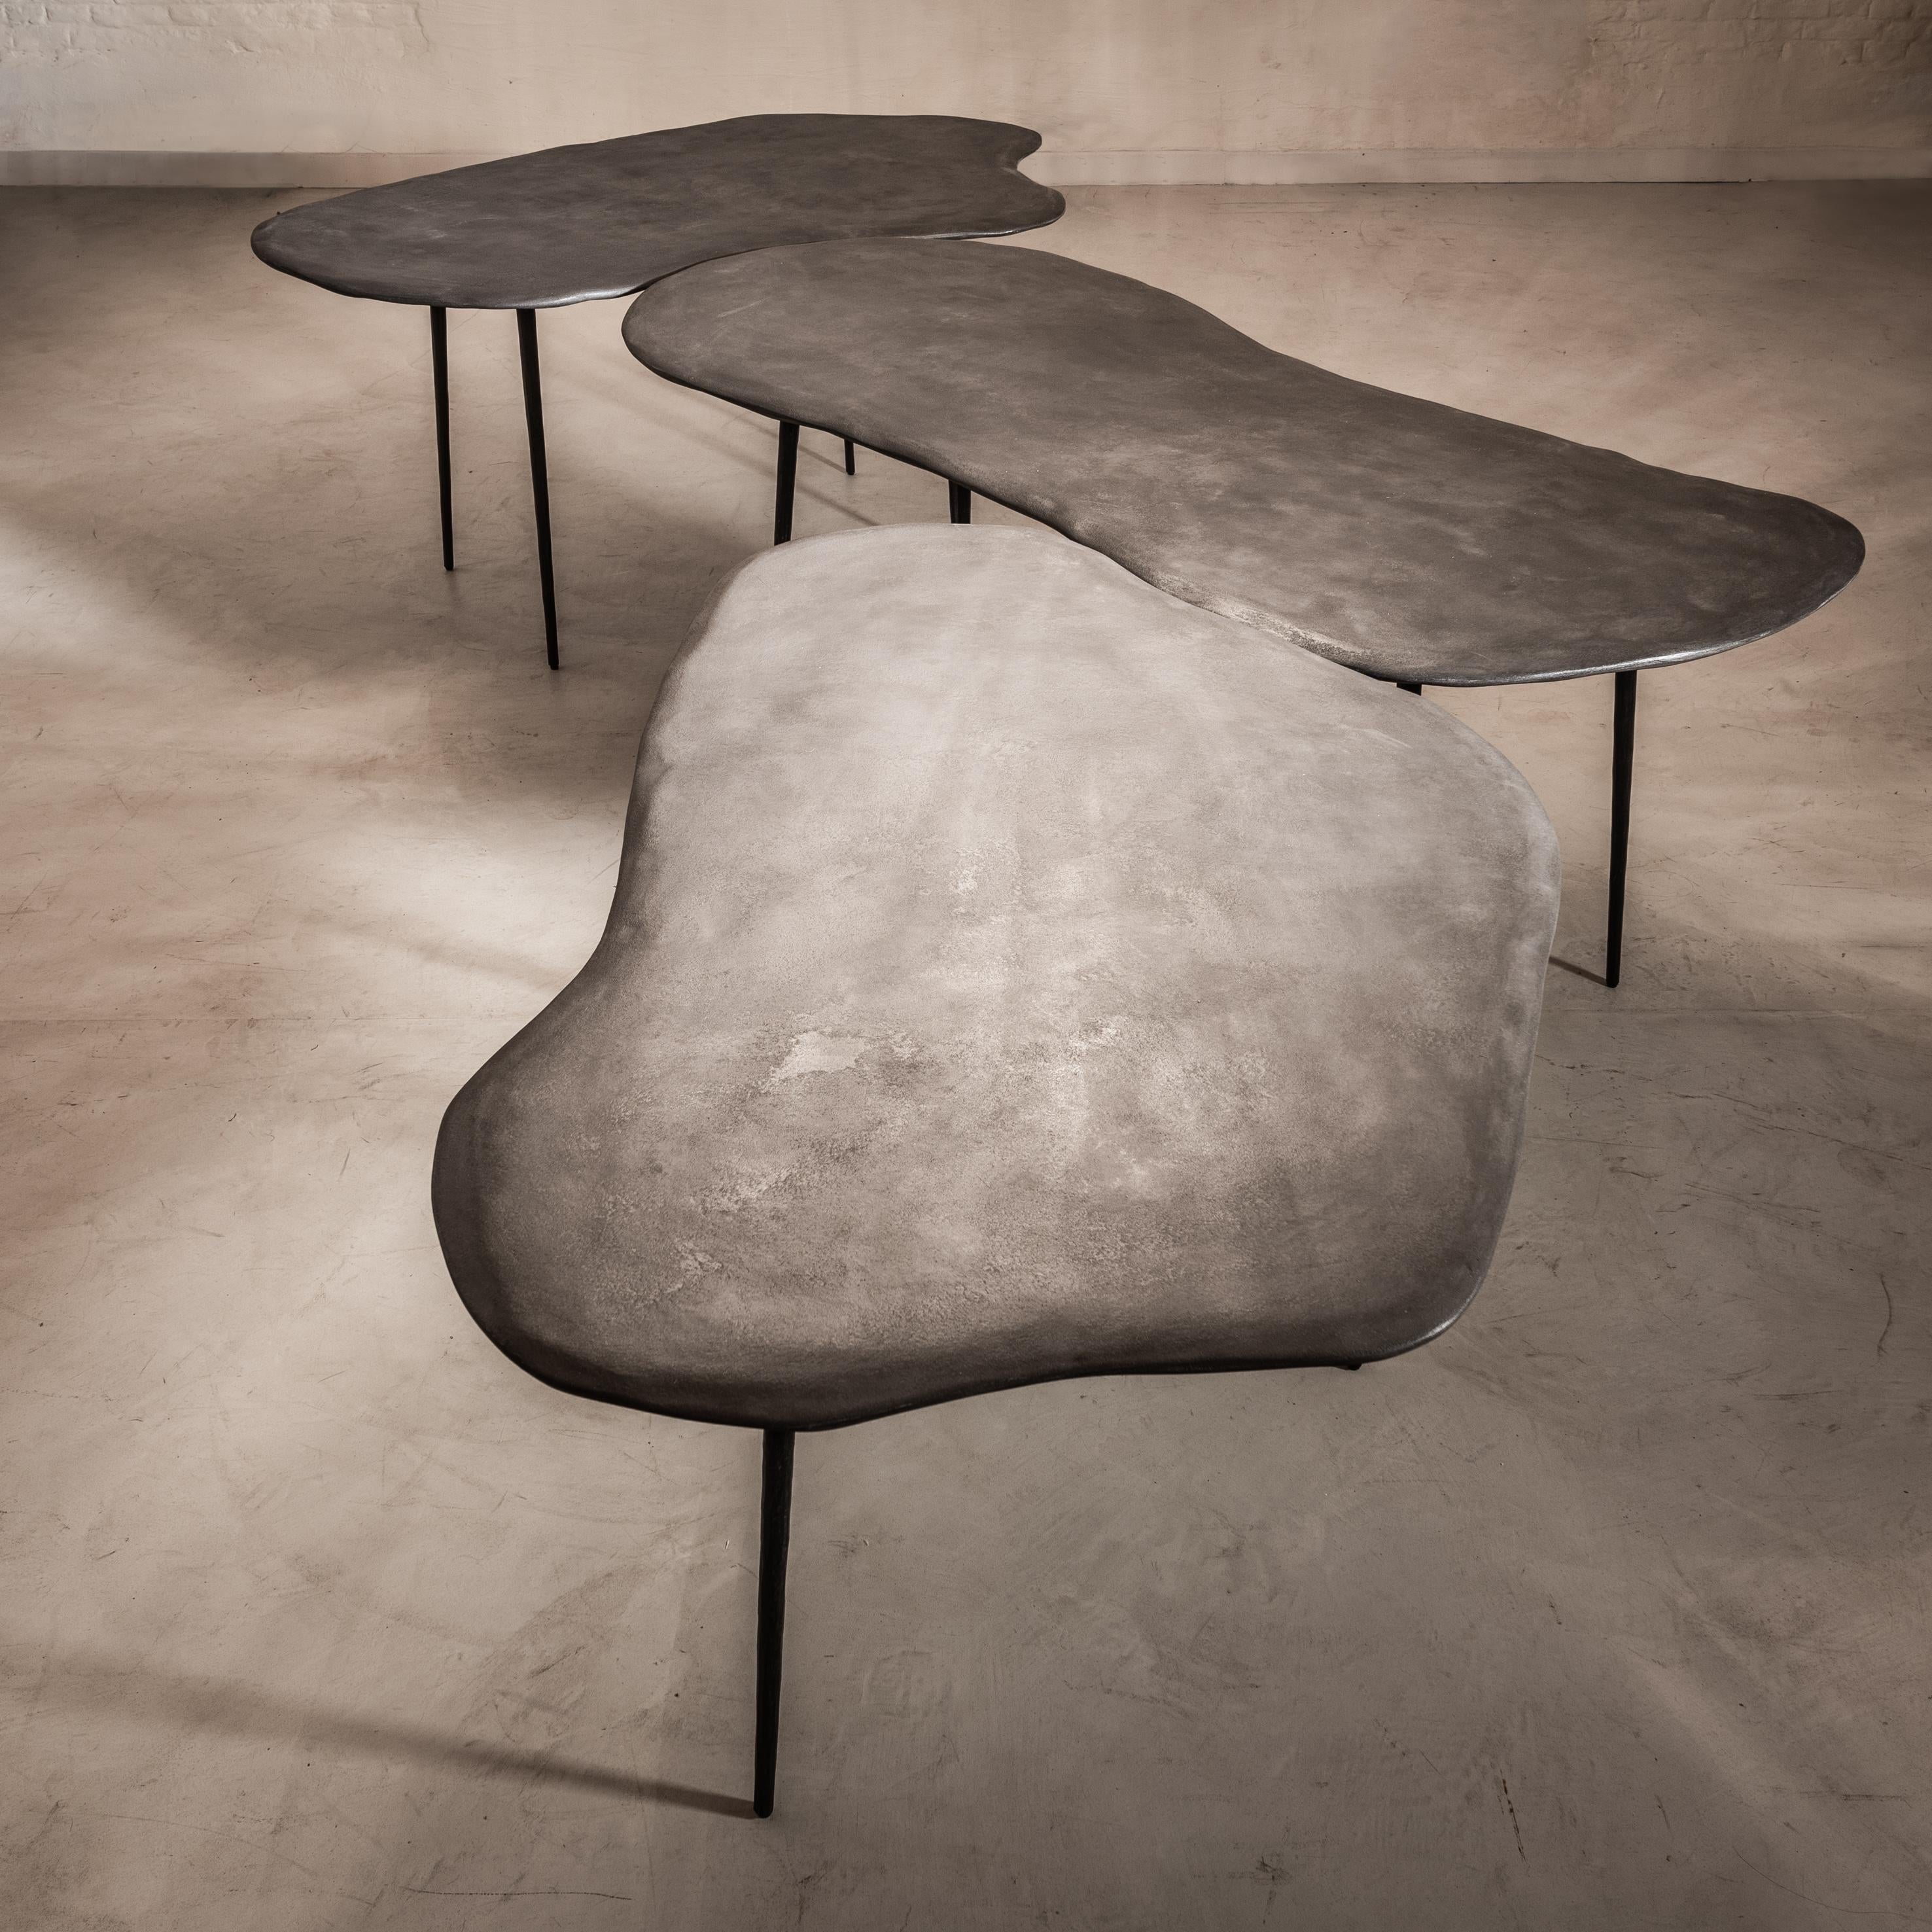 Varenna table Trio by Studio Emblématique
Dimensions: 
- W 157 x D 92 x H 76 cm
- W 162 x D 95 x H 76 cm
- W 200 x D 85 x H 76 cm
Materials: Stonegrain table top with conical metal hammered legs

Pushing the boundaries, going the extra mile